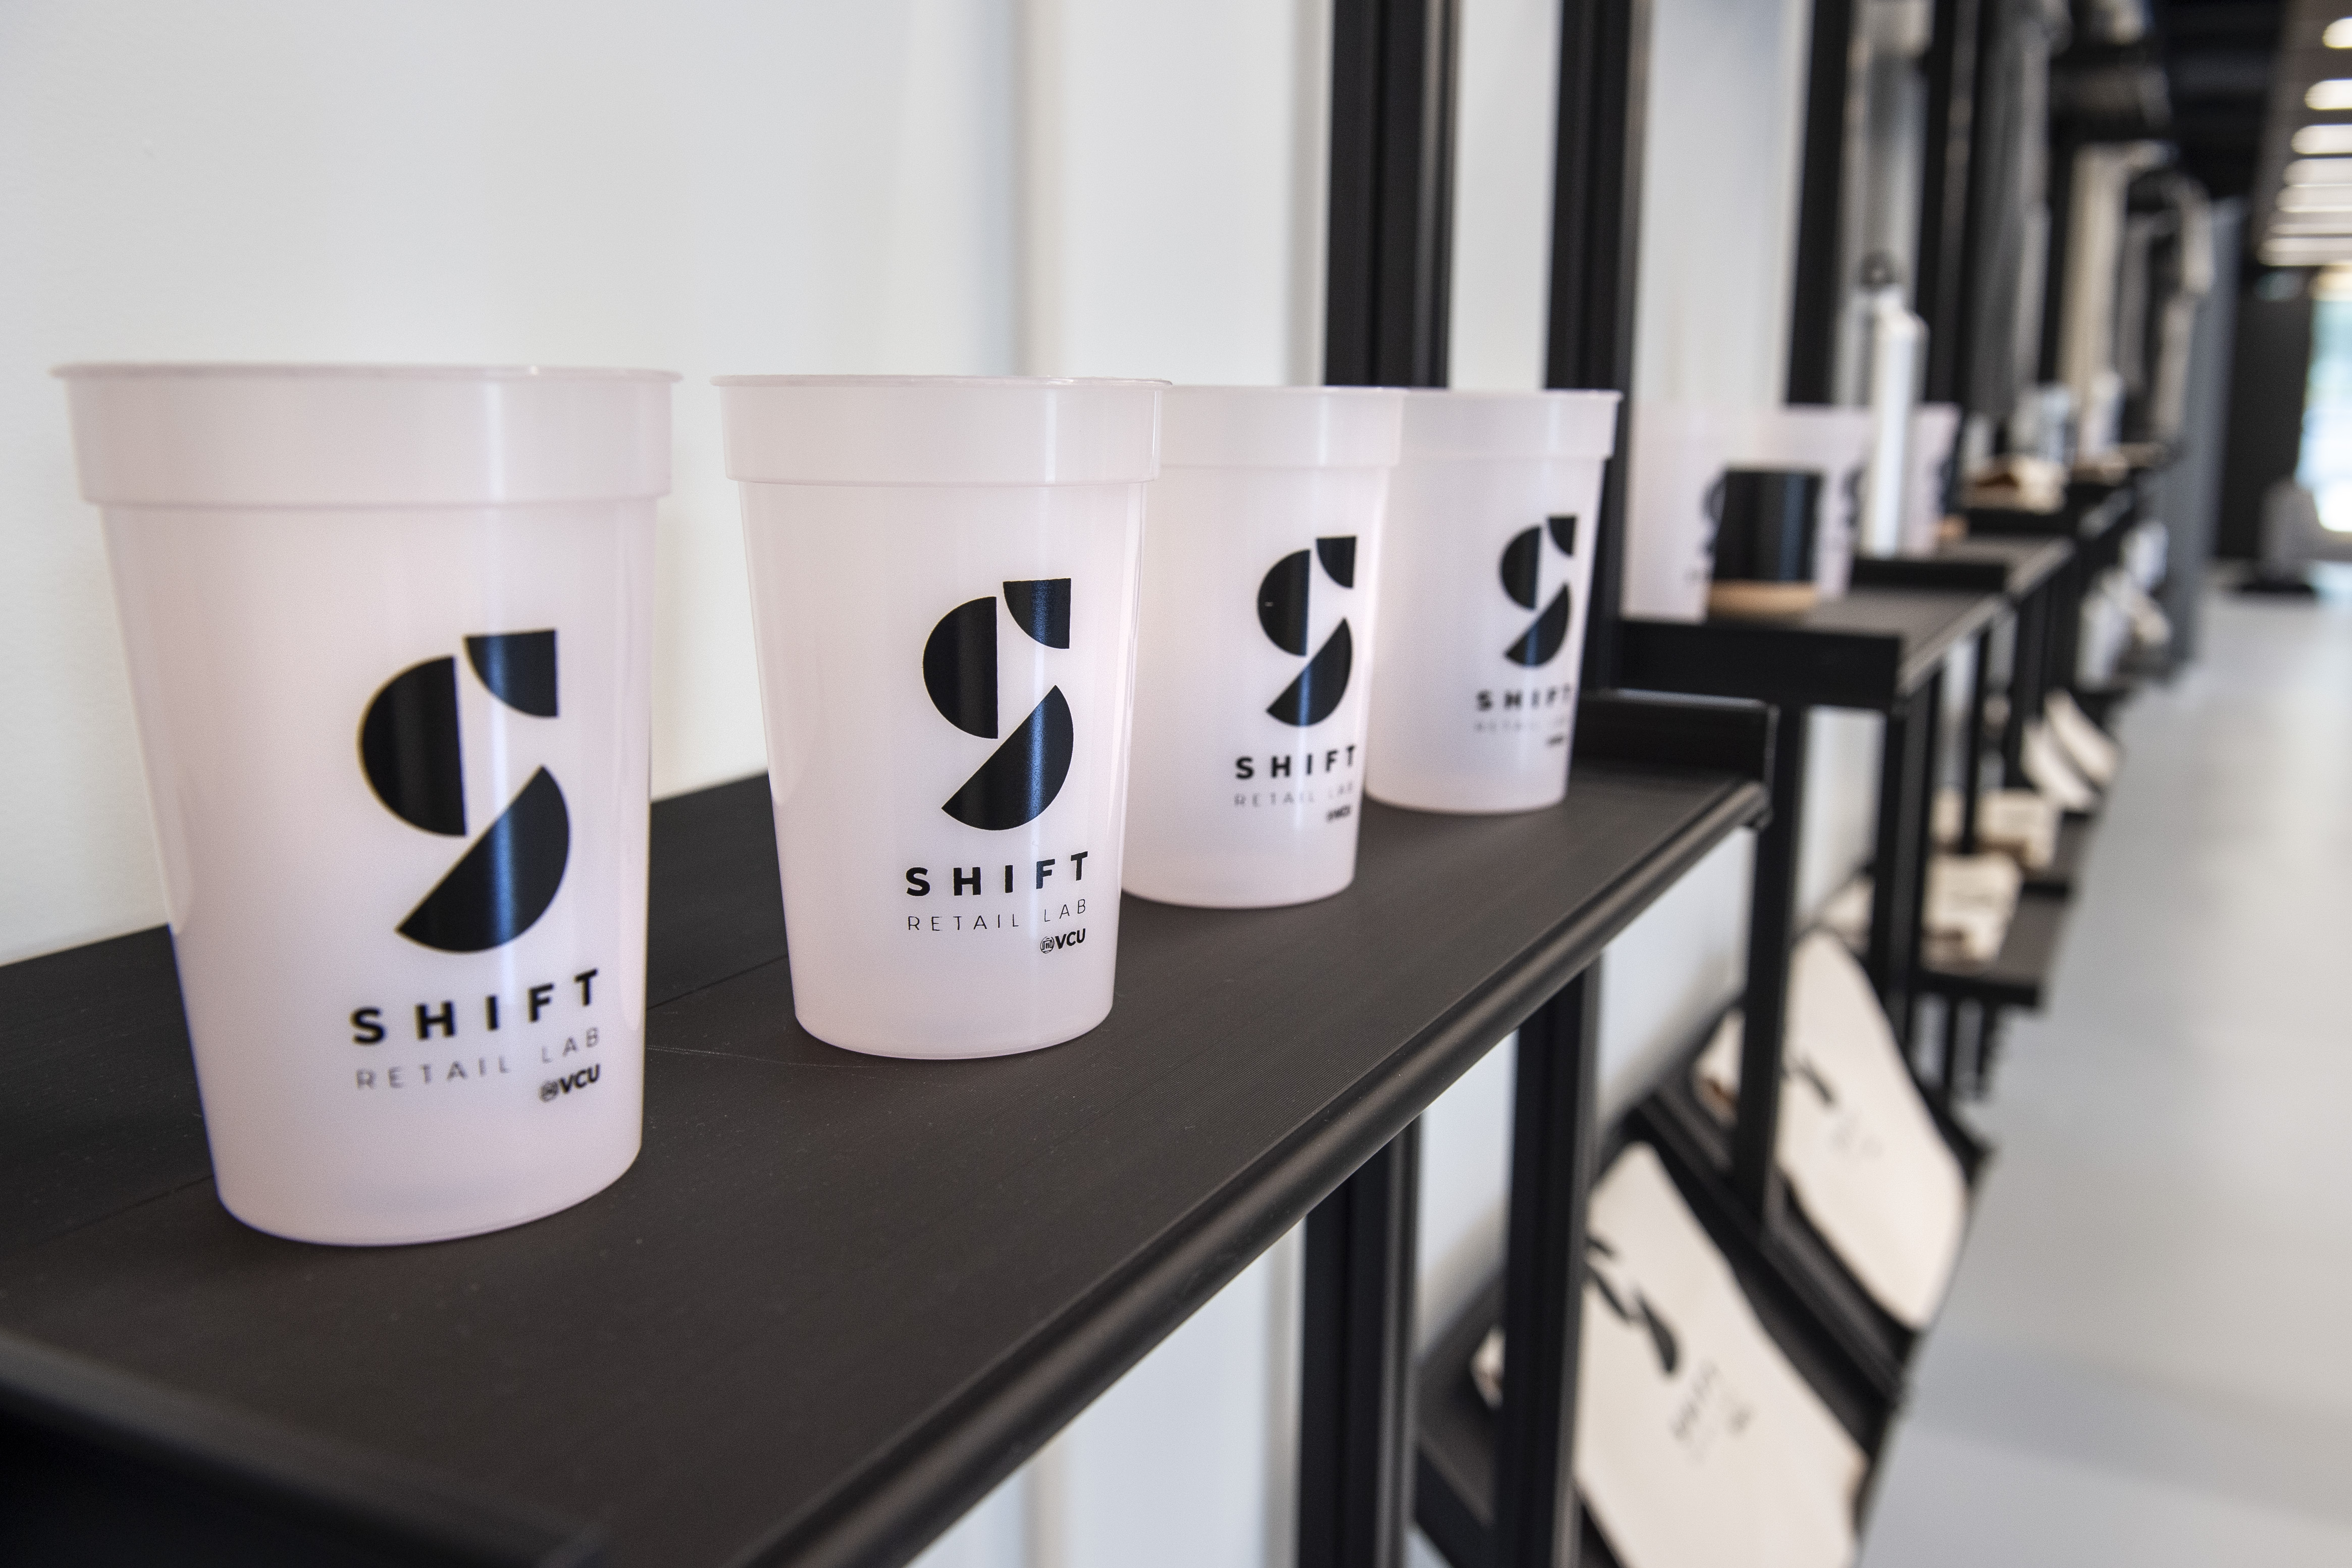 translucent pink cups with the shift retail lab logo arranged in a line across a row of shelves